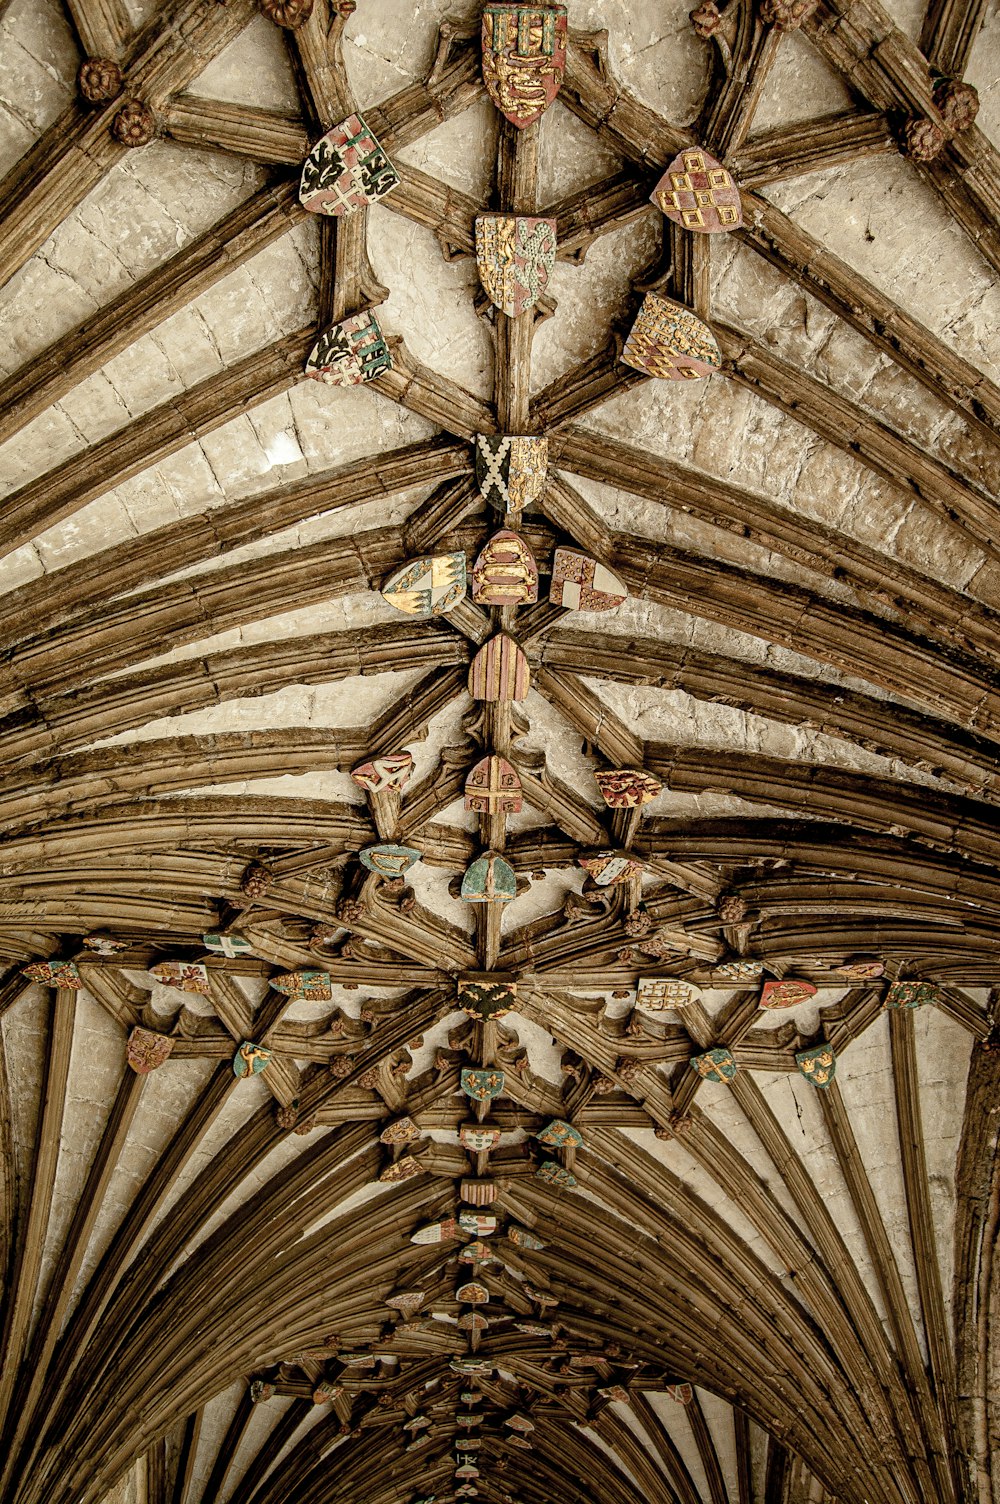 the ceiling of an old building with wooden beams